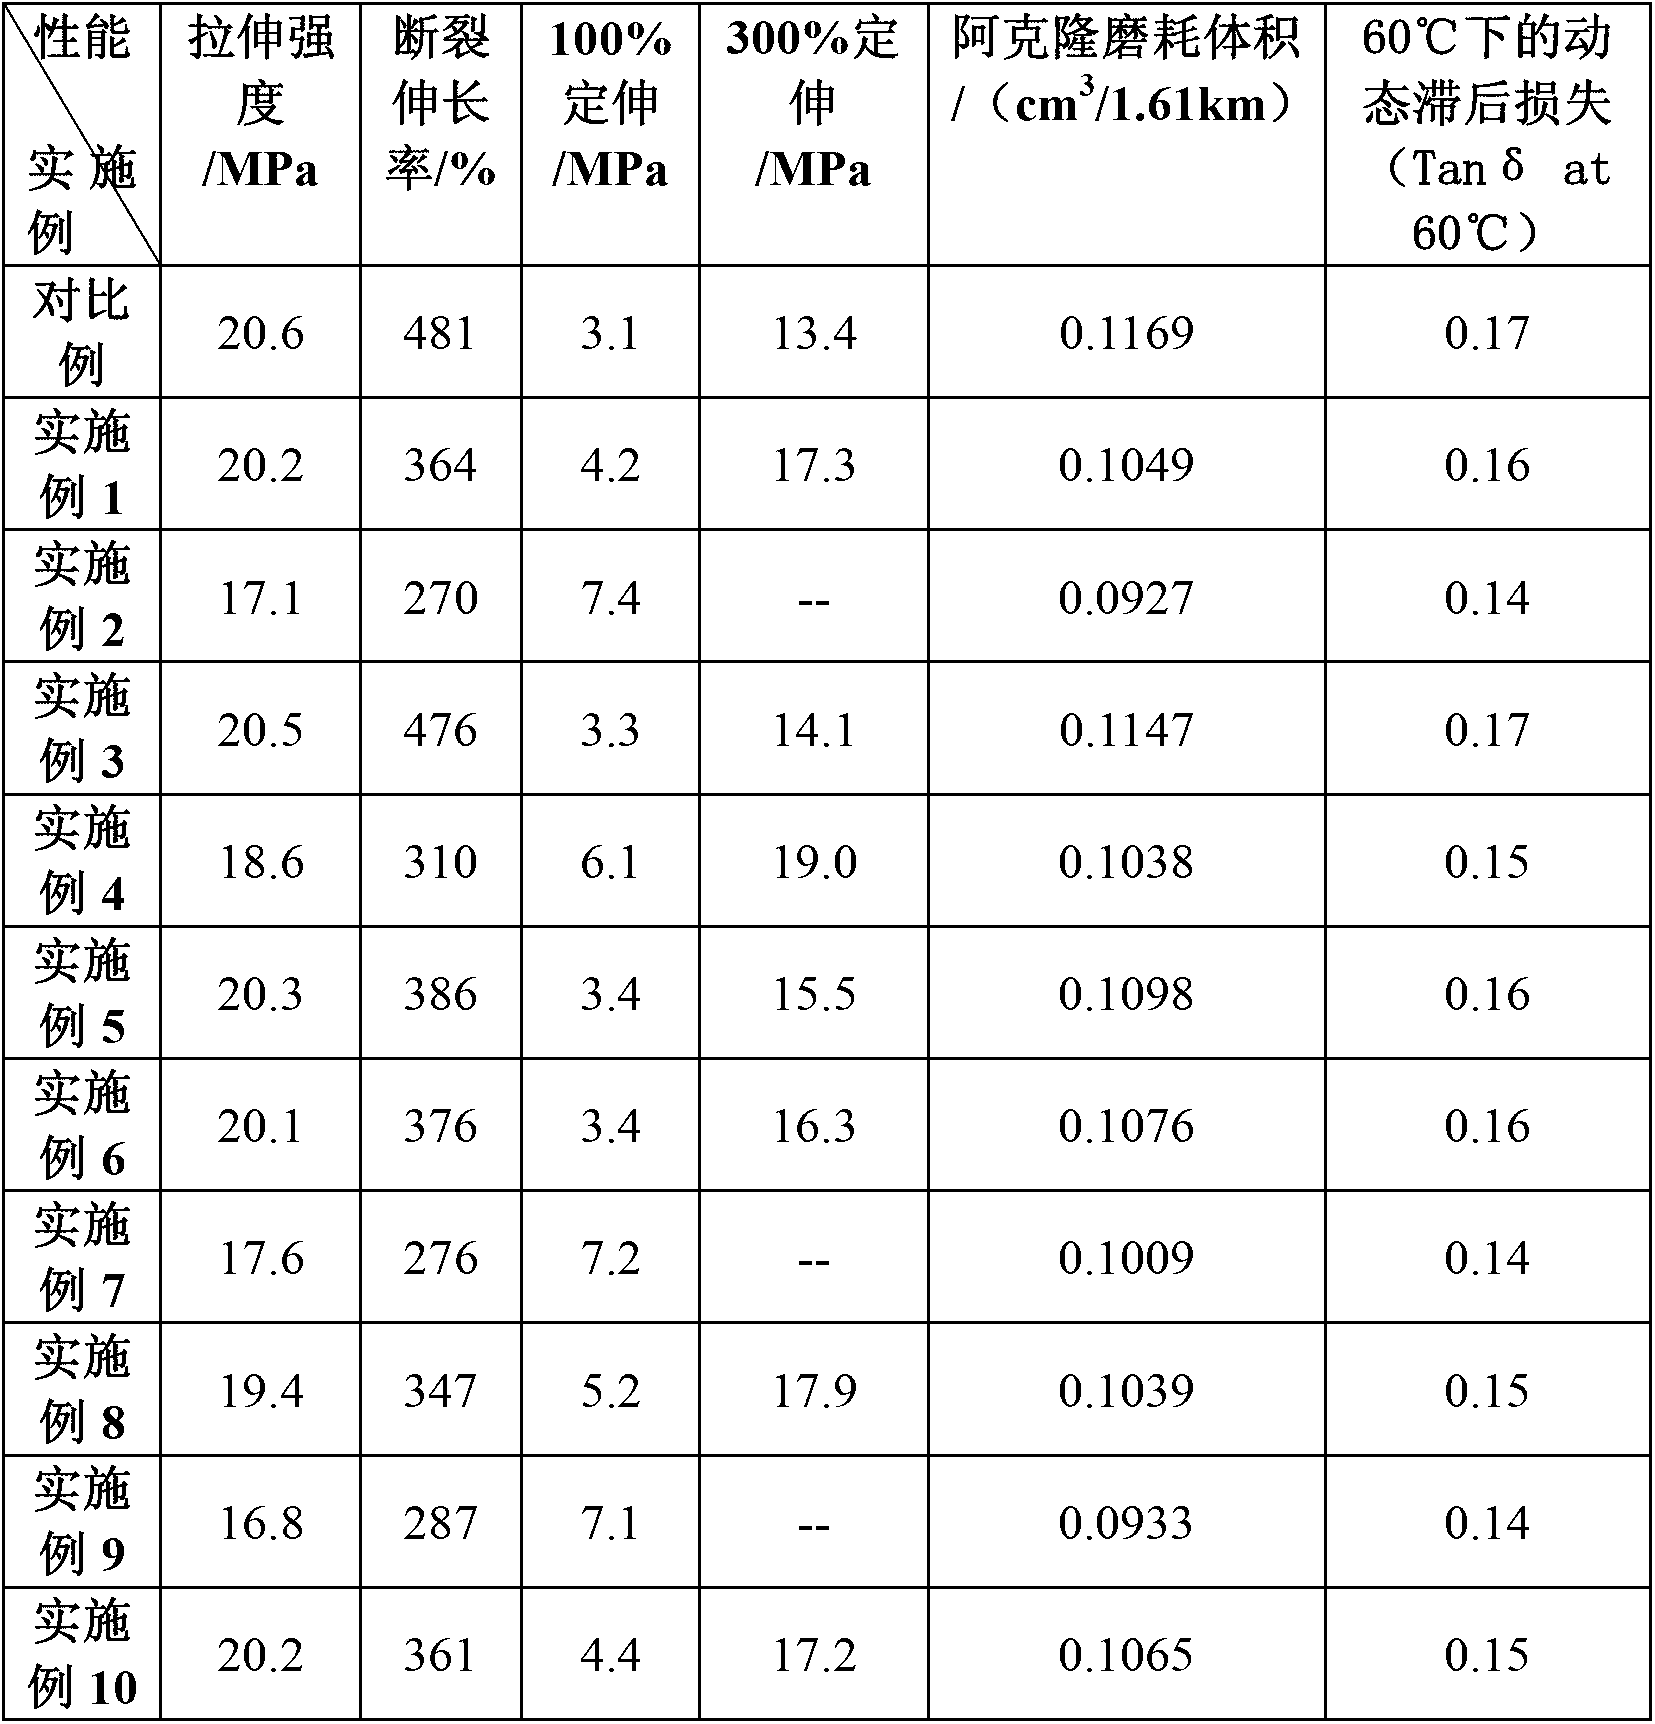 Electron beam modification method for reducing rolling resistance of tire tread rubber material and improving abrasion resistance